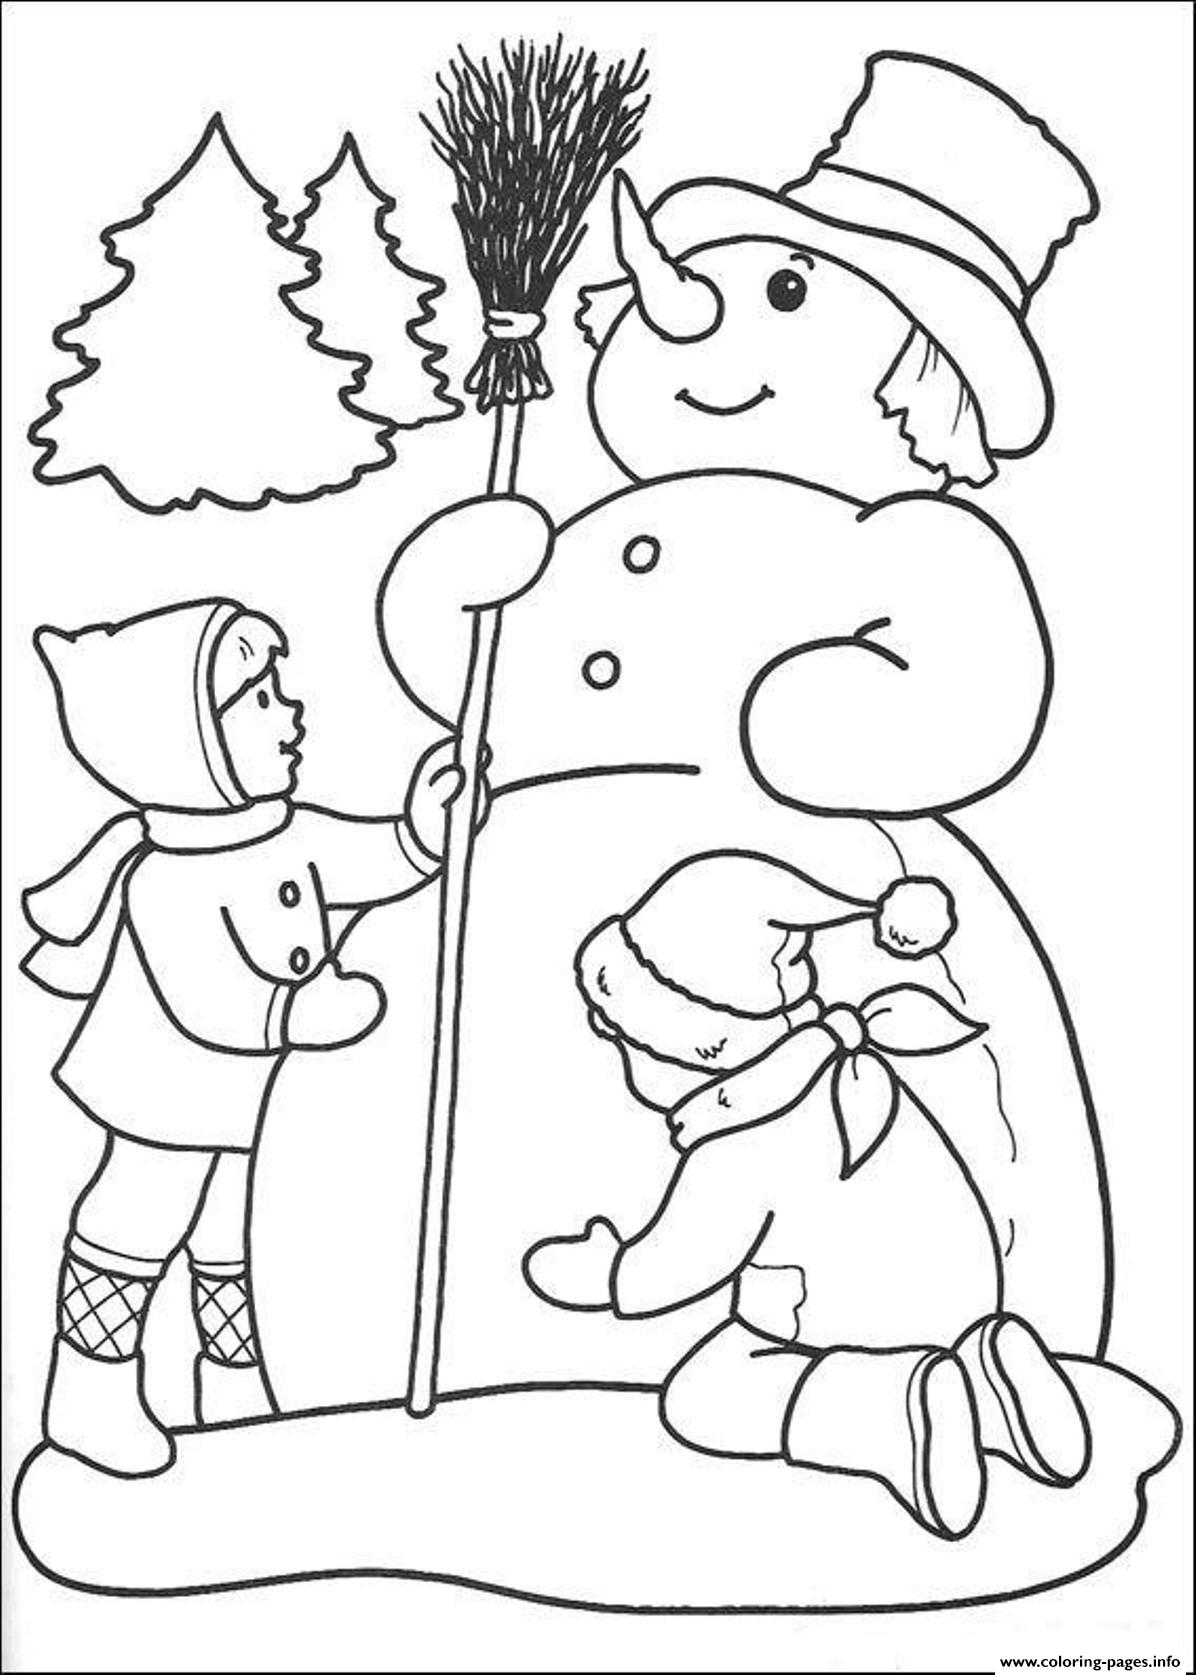 Winter Kids Are Making Snowman 55aa coloring